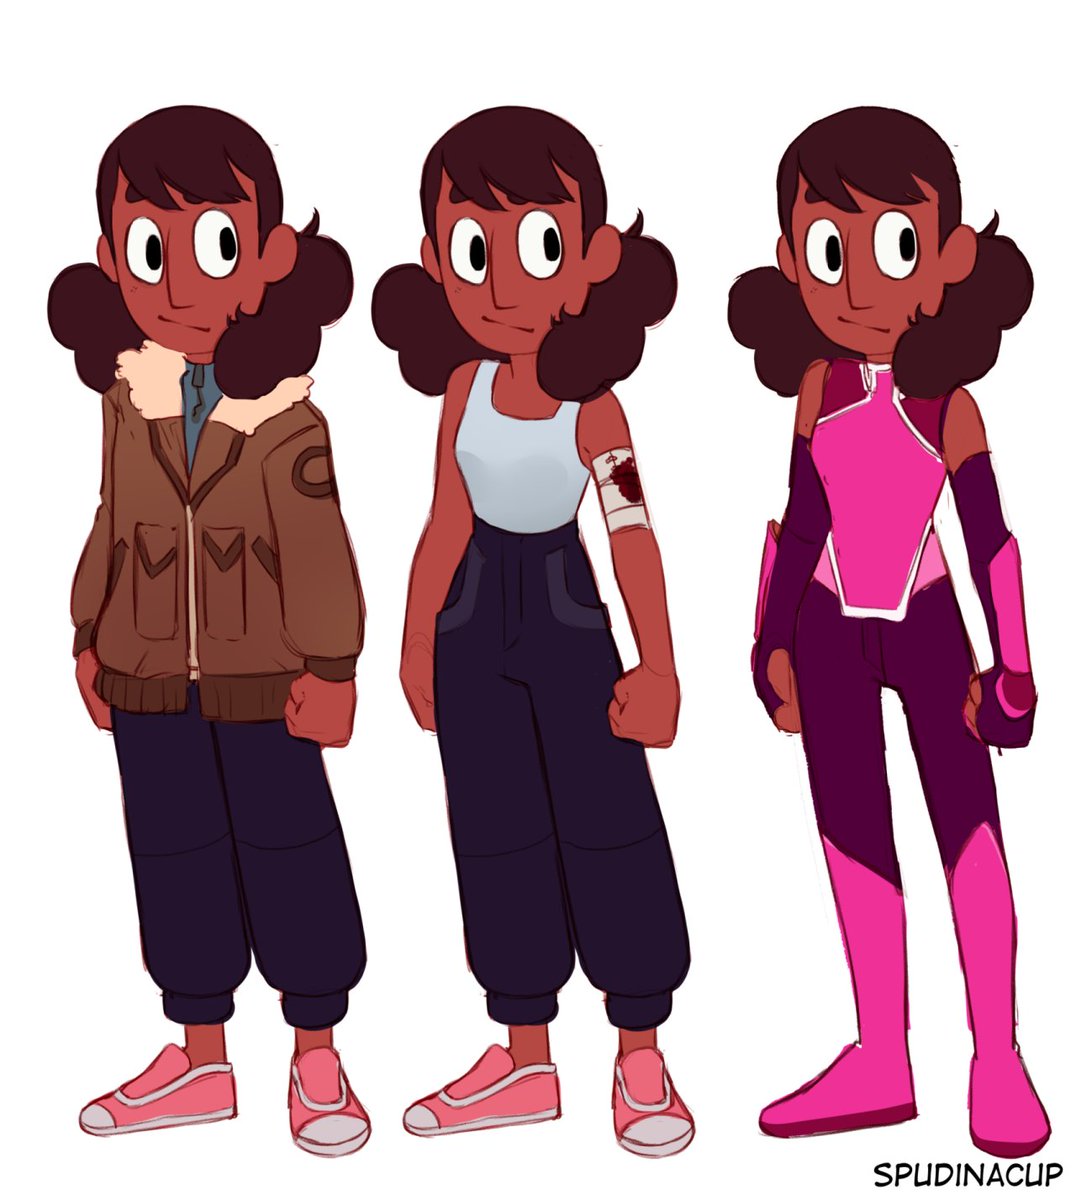 Connie is a blessing and deserves to be protected, just sayin.
#StevenUniverseFuture #StevenUniverse #StevenUniverseTheMovie #connie #ConnieMaheswaran